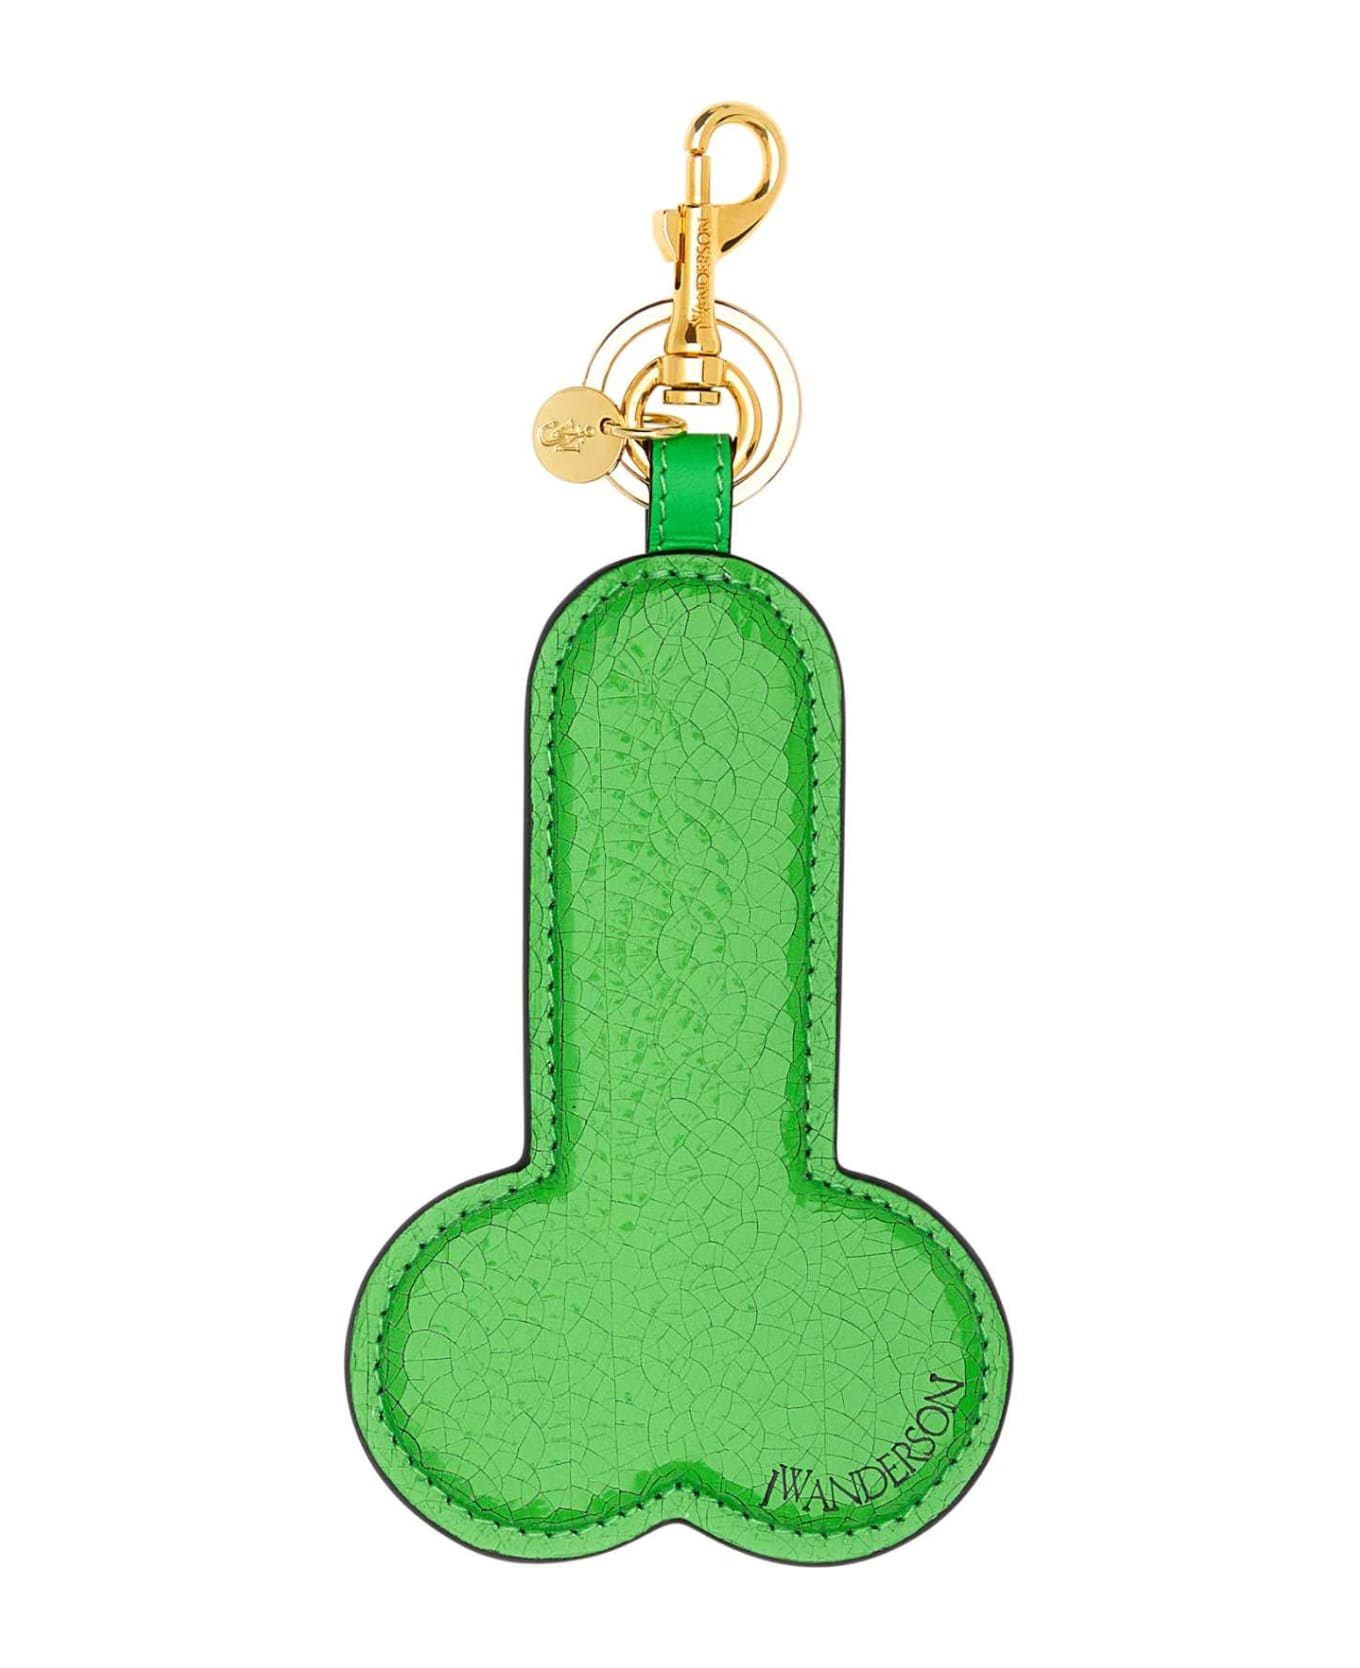 J.W. Anderson Fluo Green Leather Key Ring - NEONGREEN